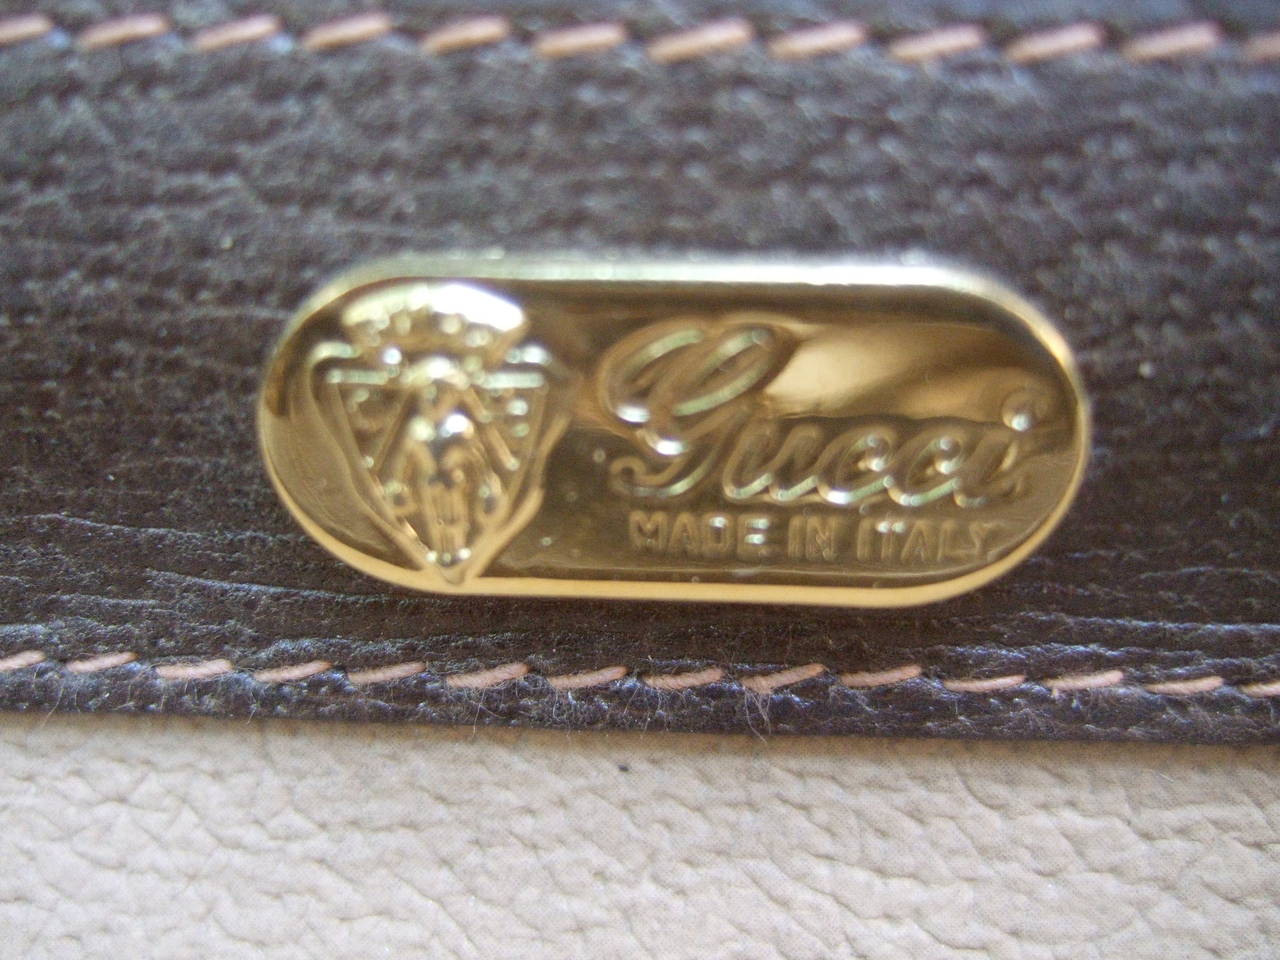 RESERVED SALE PENDING Gucci Luxurious Retro Travel Case Made in Italy c 1970s 3